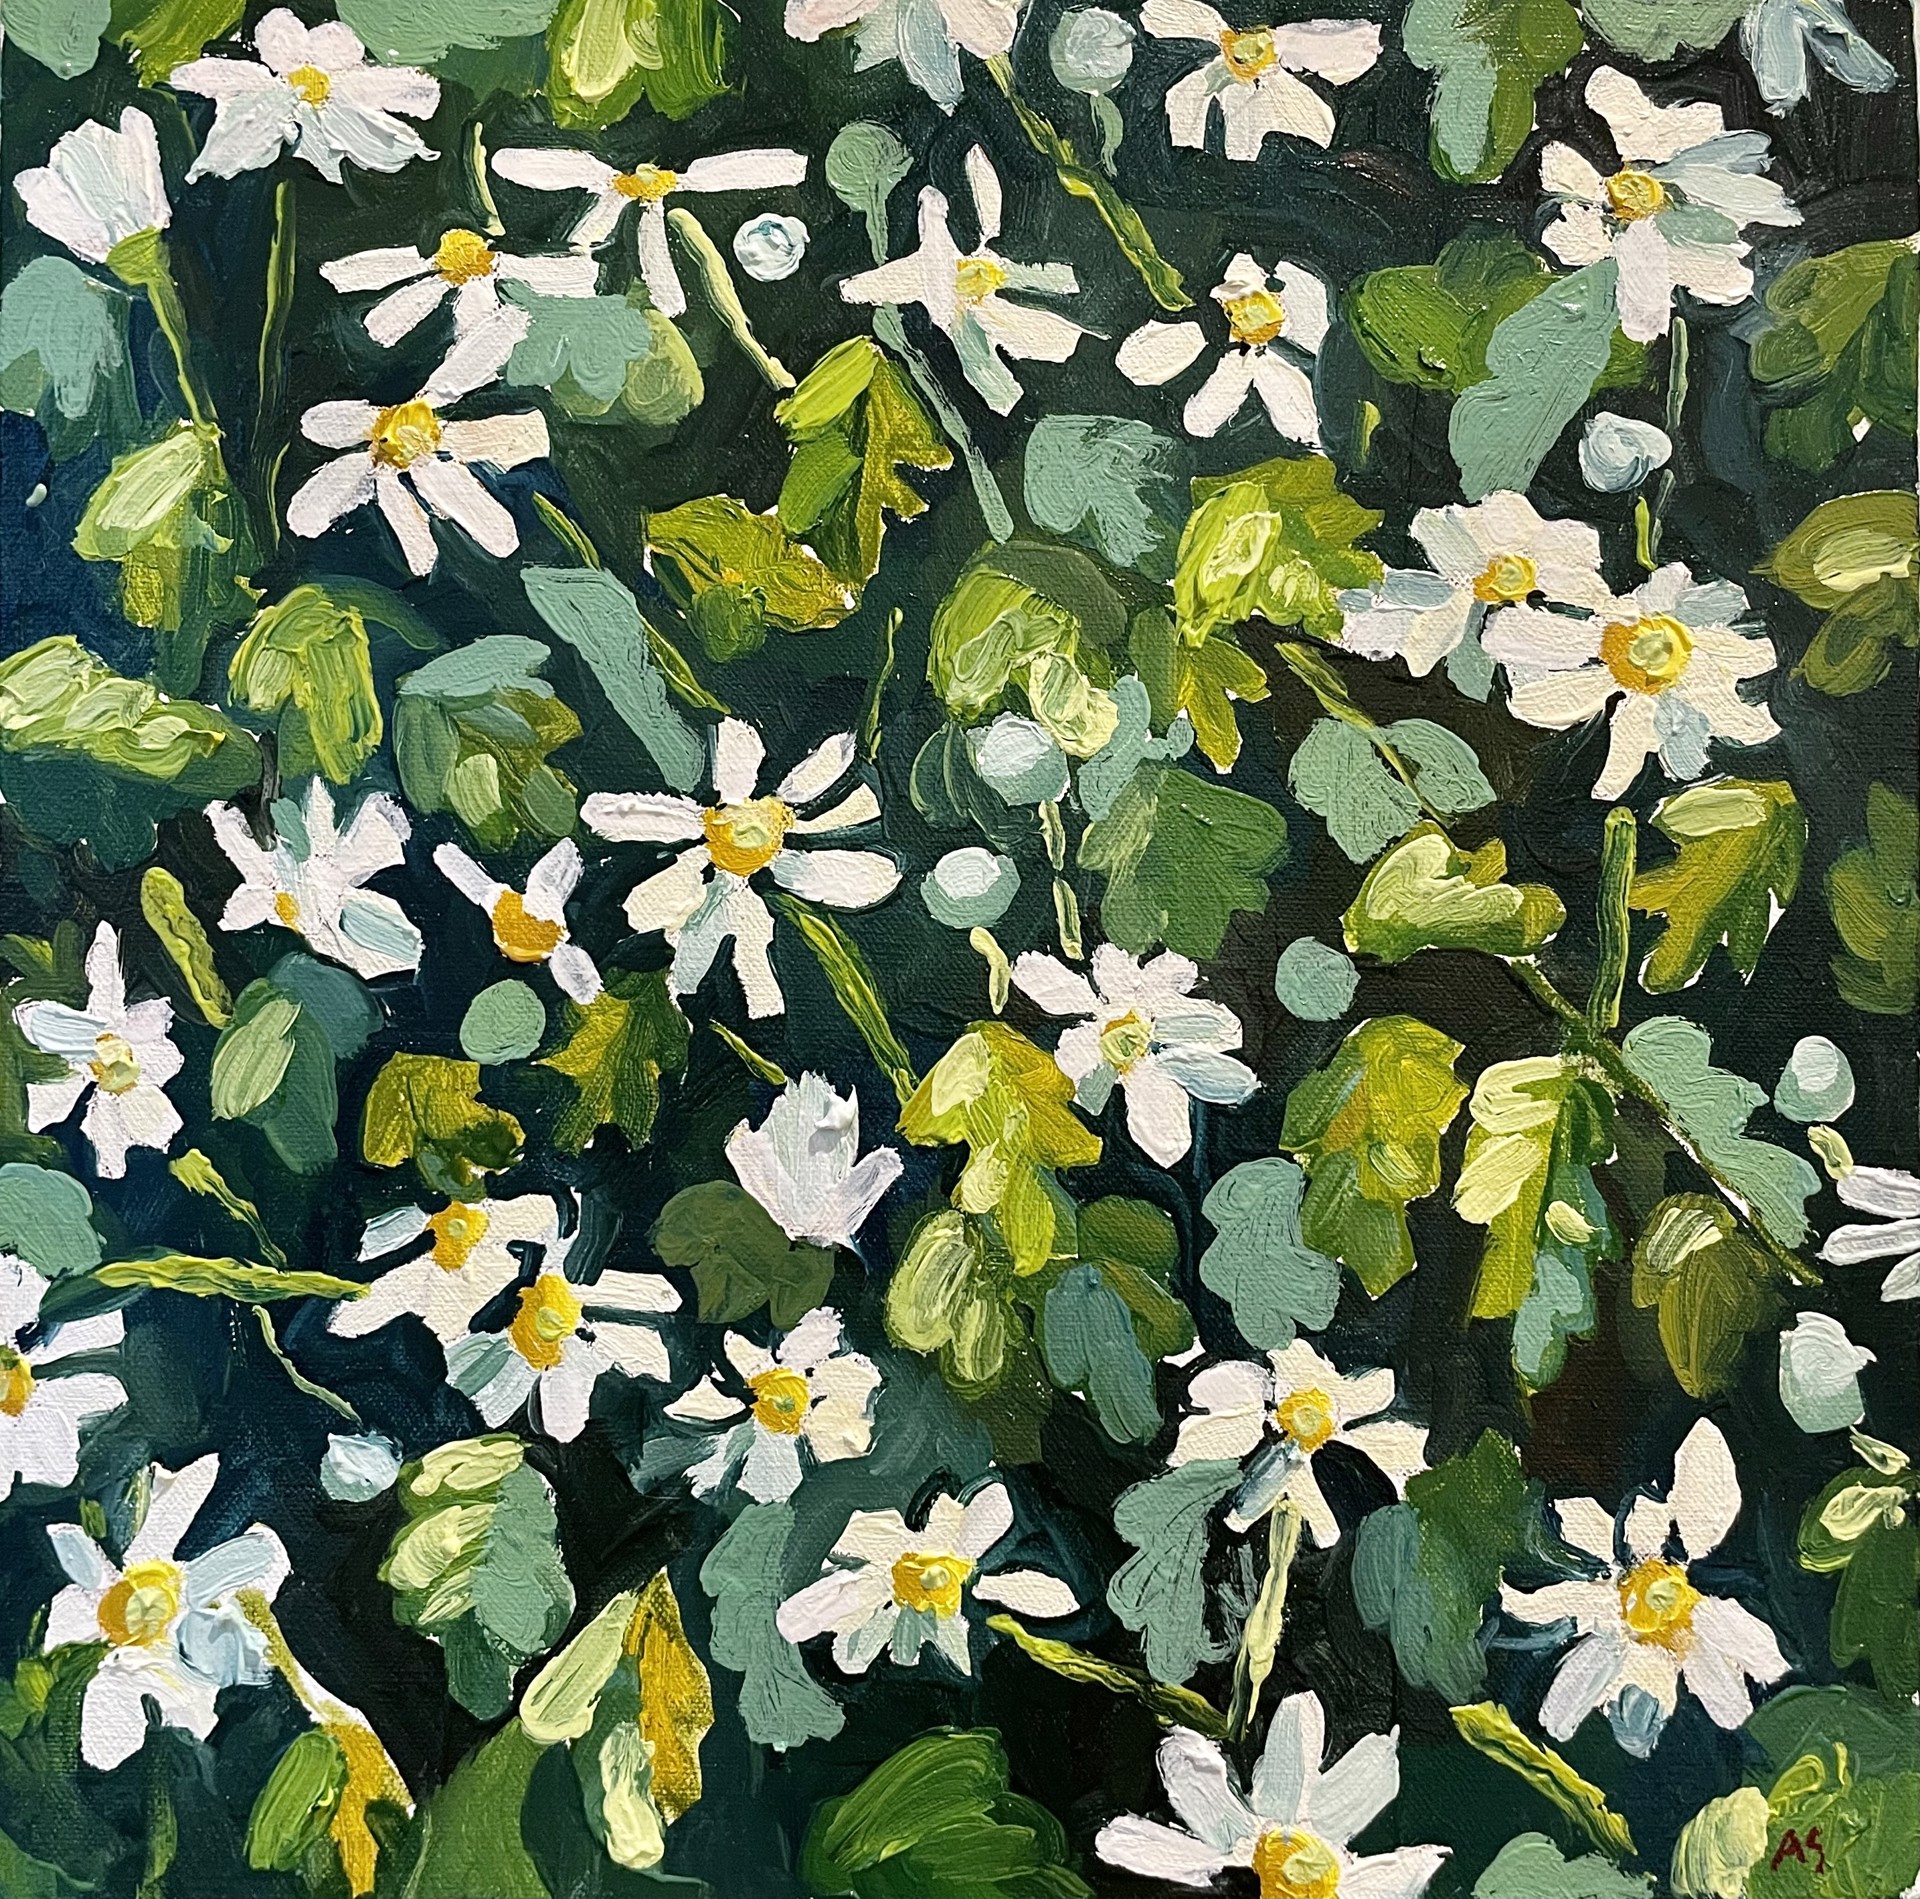 Daisies I by Avery Schuster